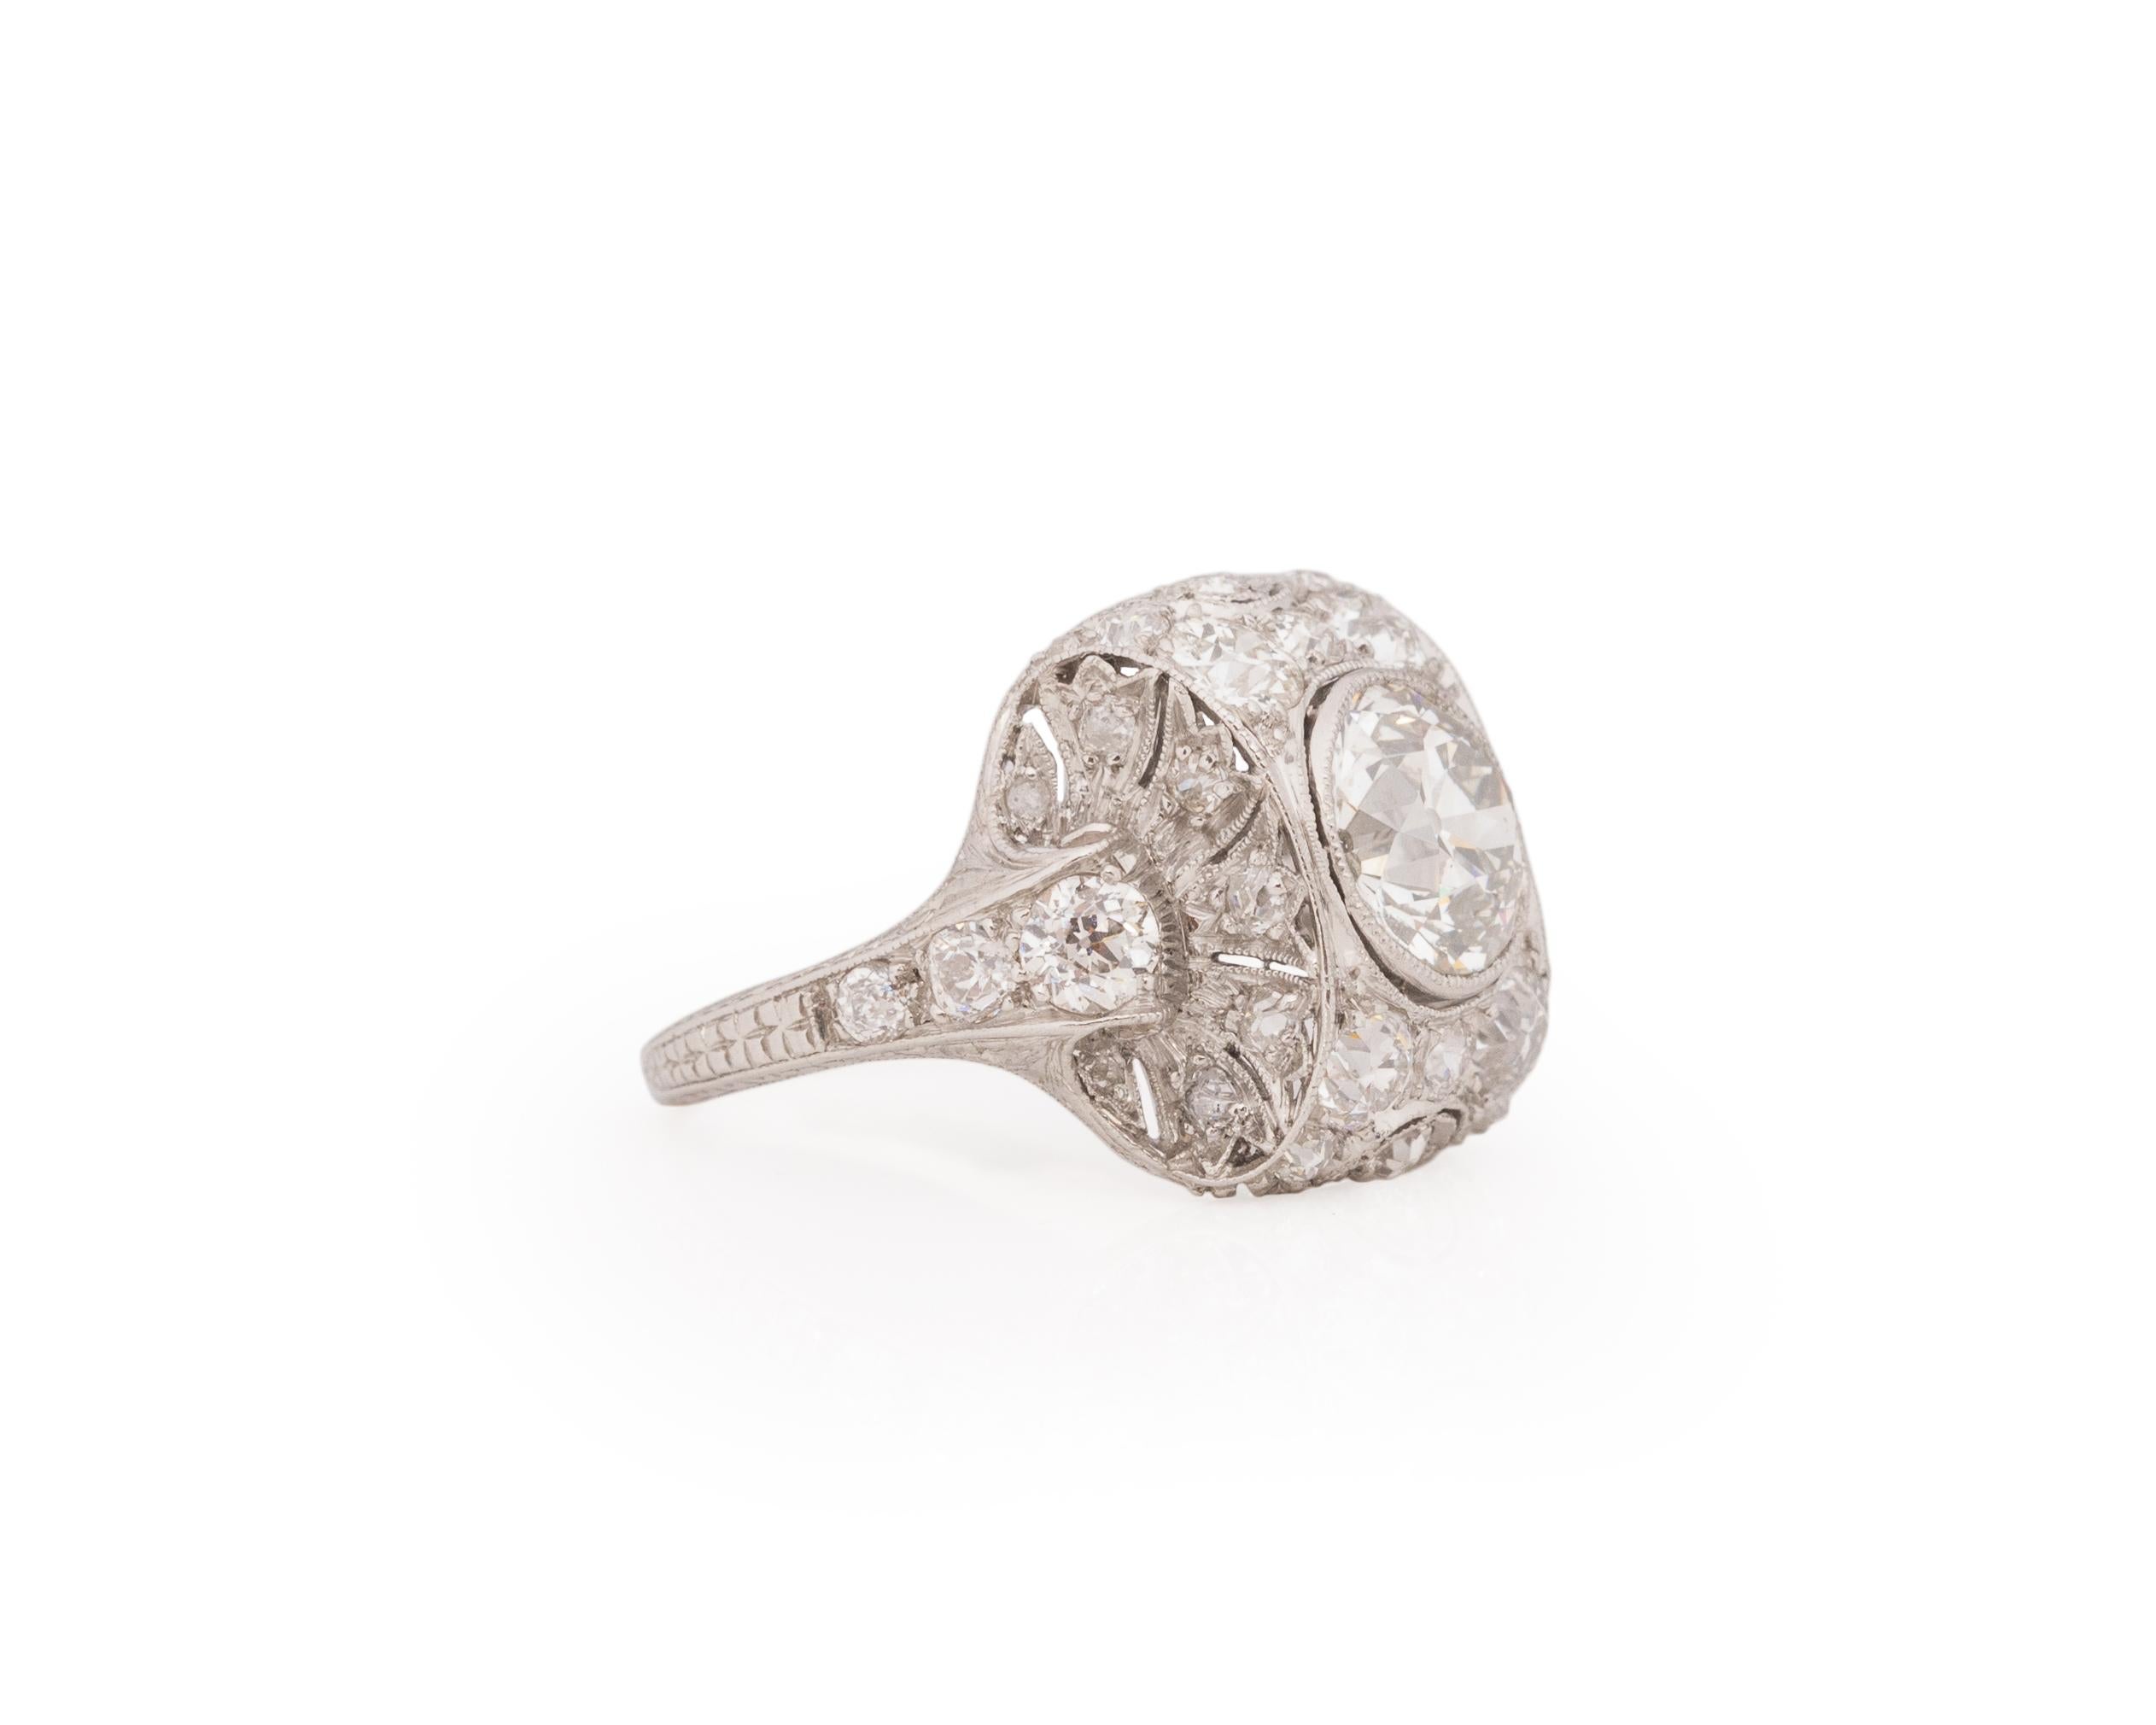 Ring Size: 5
Metal Type: Platinum [Hallmarked, and Tested]
Weight: 5.8 grams

Diamond Details:
GIA REPORT #: 1236013987
Weight: 1.50ct
Cut: Old European brilliant
Color: L
Clarity: SI2
Measurements: 7.29mm x 7.52mm x 4.42mm

Finger to Top of Stone